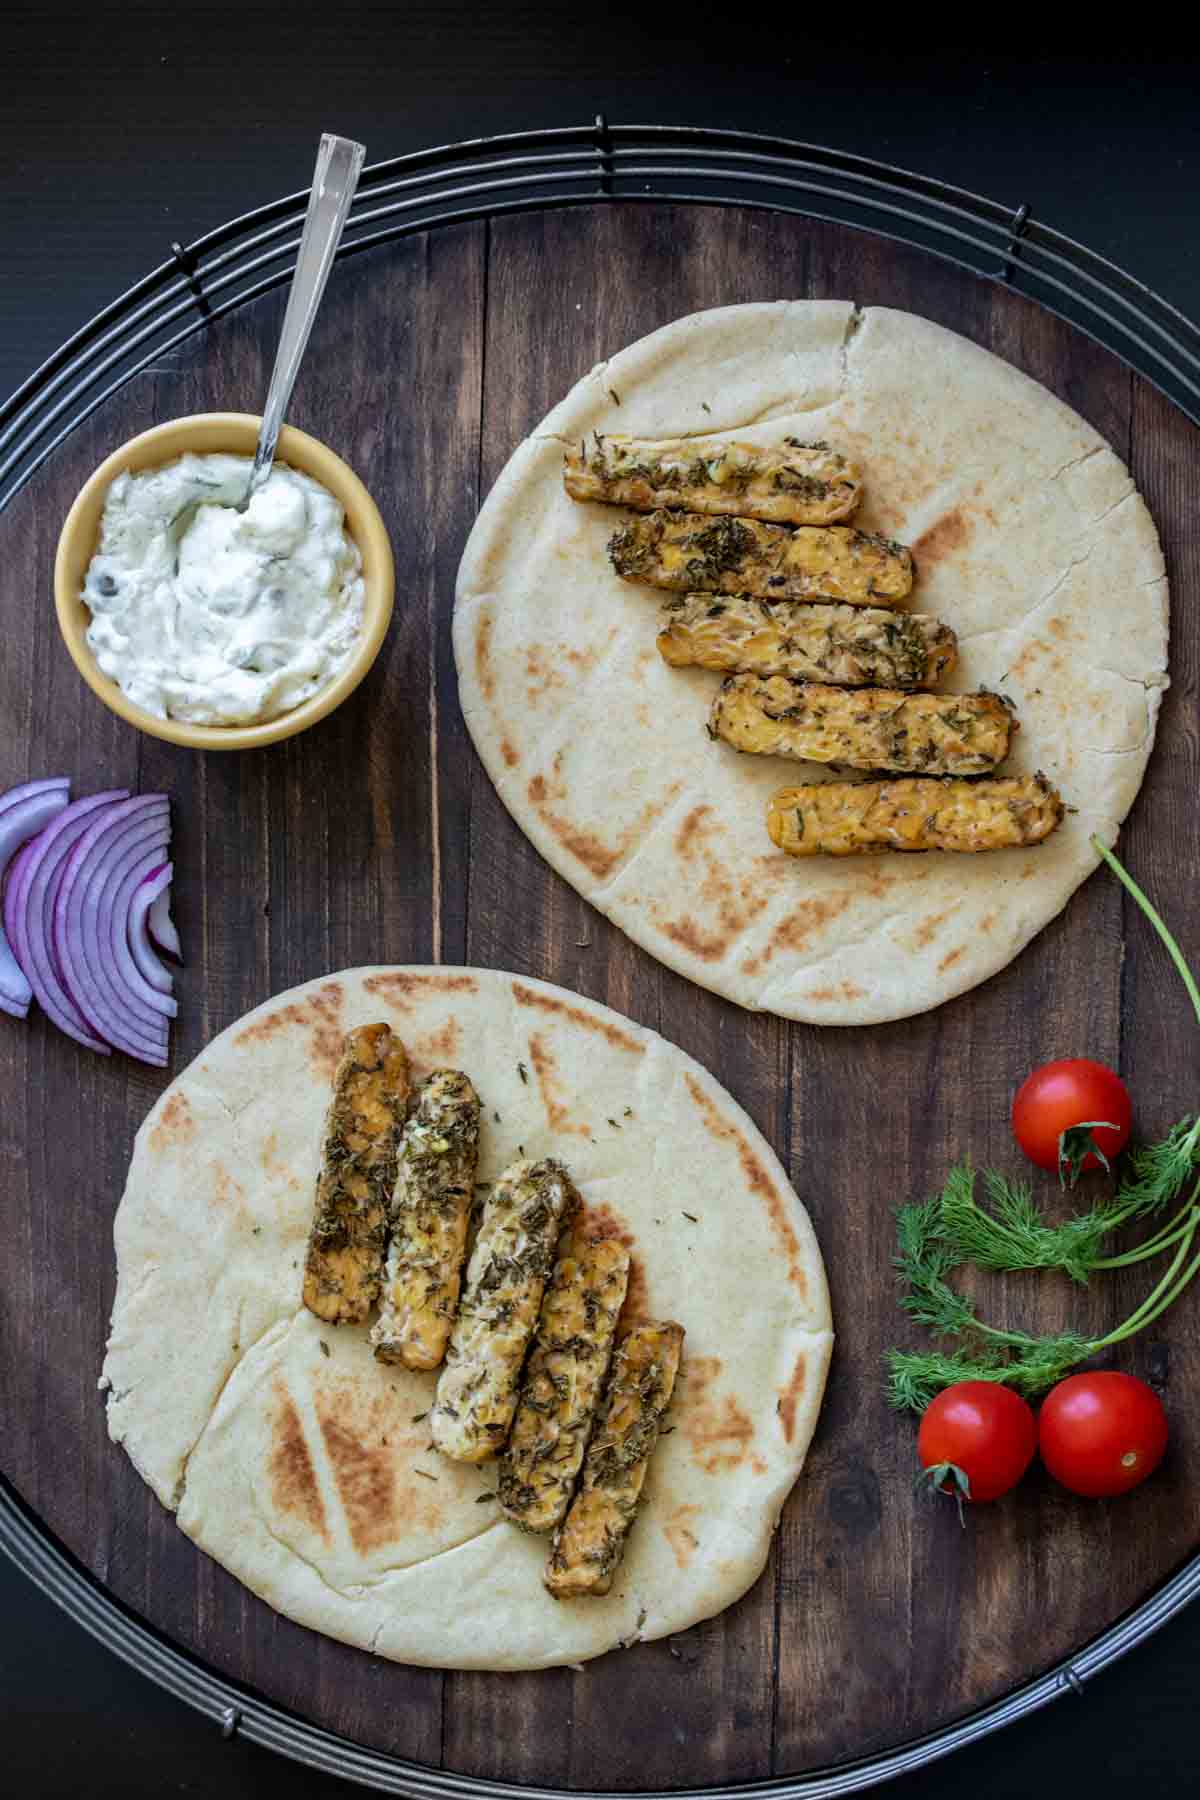 Slices of tempeh on two pita bread on a wooden surface and other ingredients for gyros around them.